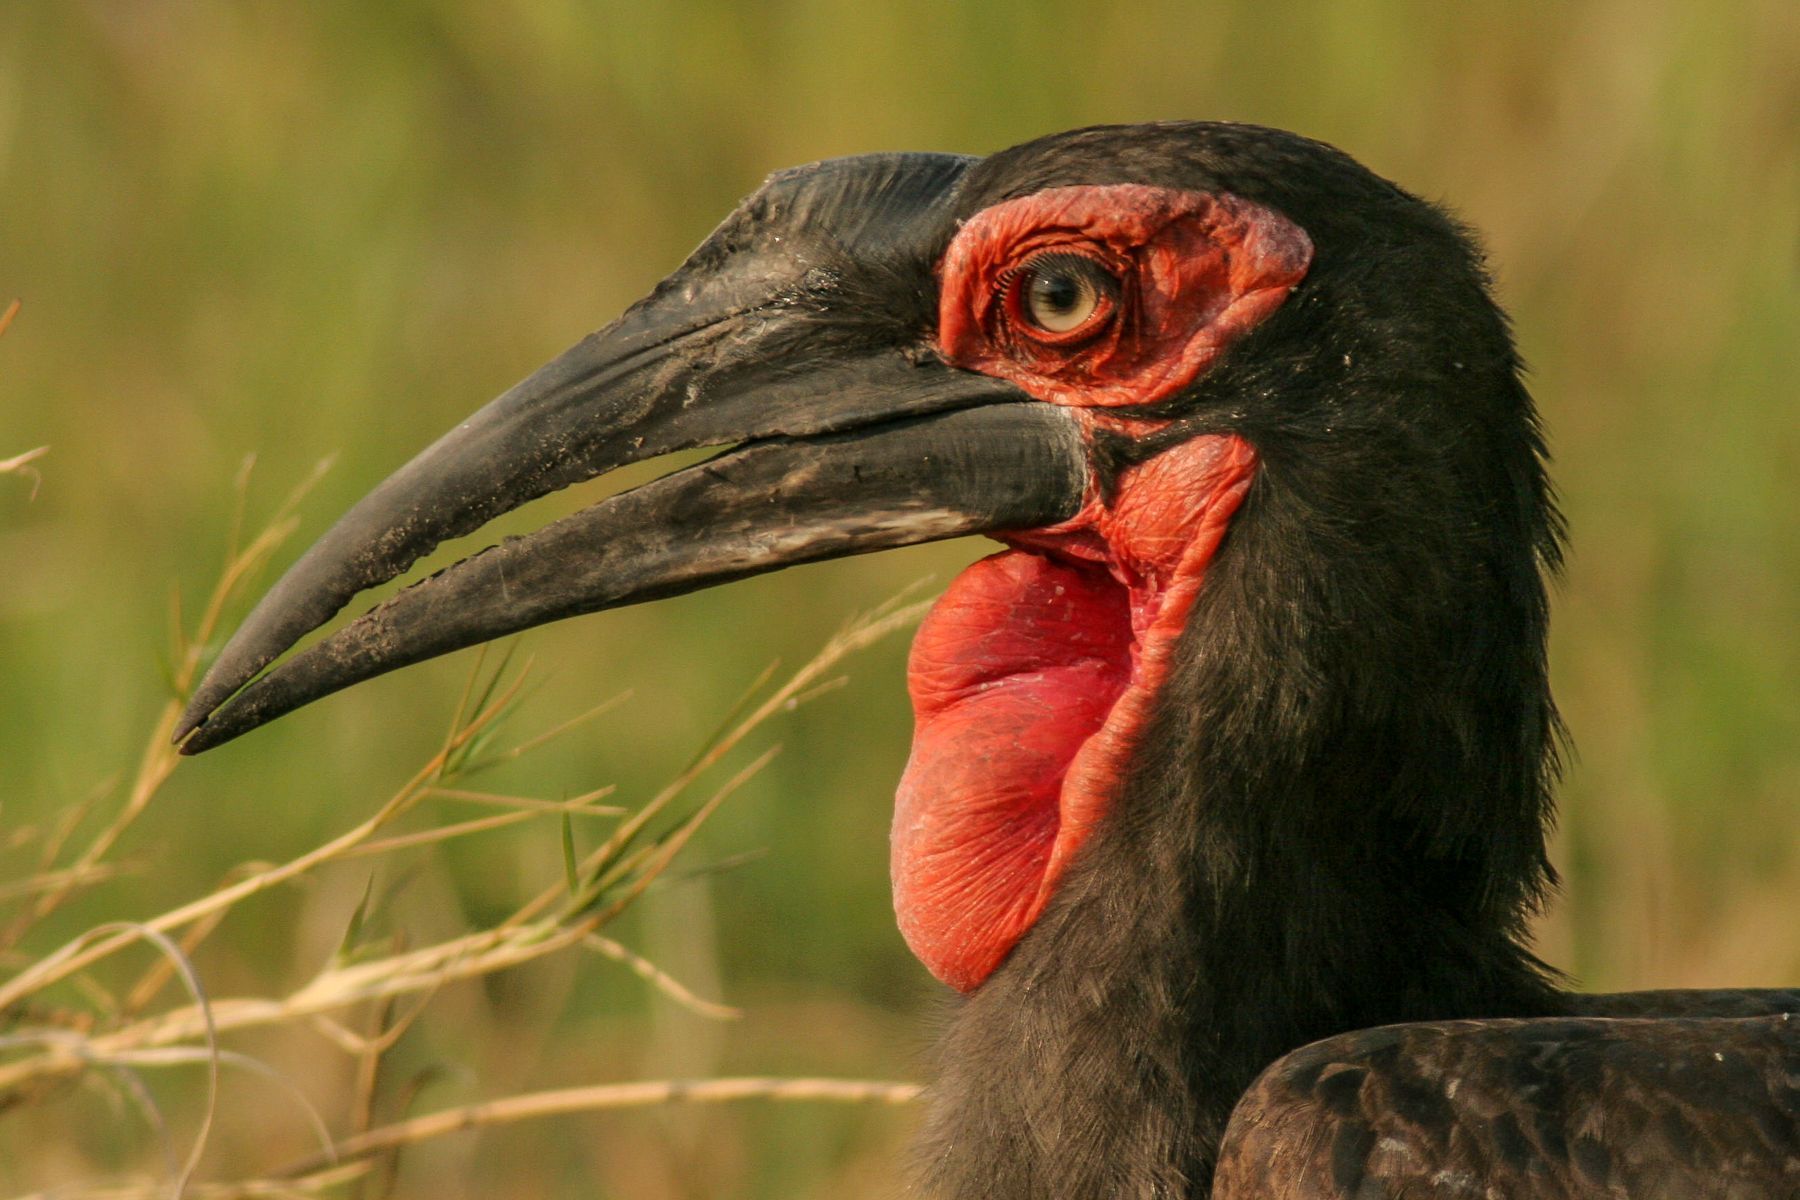 The Southern Ground Hornbill makes for a grotesque portrait